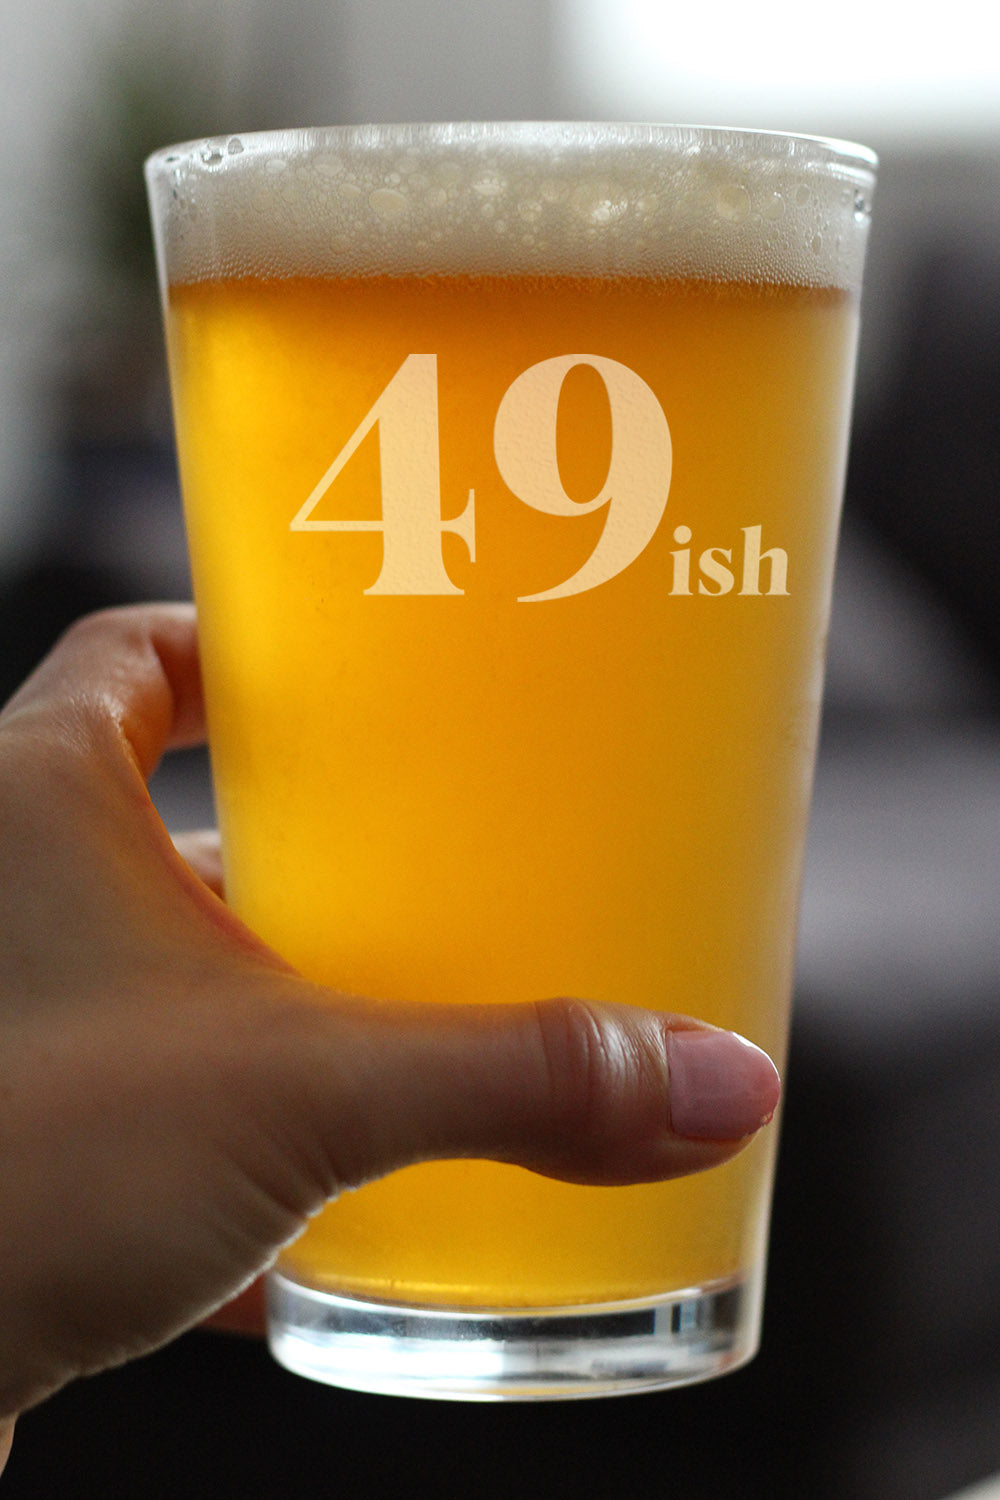 49ish - Funny 16 oz Pint Glass for Beer - 50th Birthday Gifts for Men or Women Turning 50 - Fun Bday Party Decor